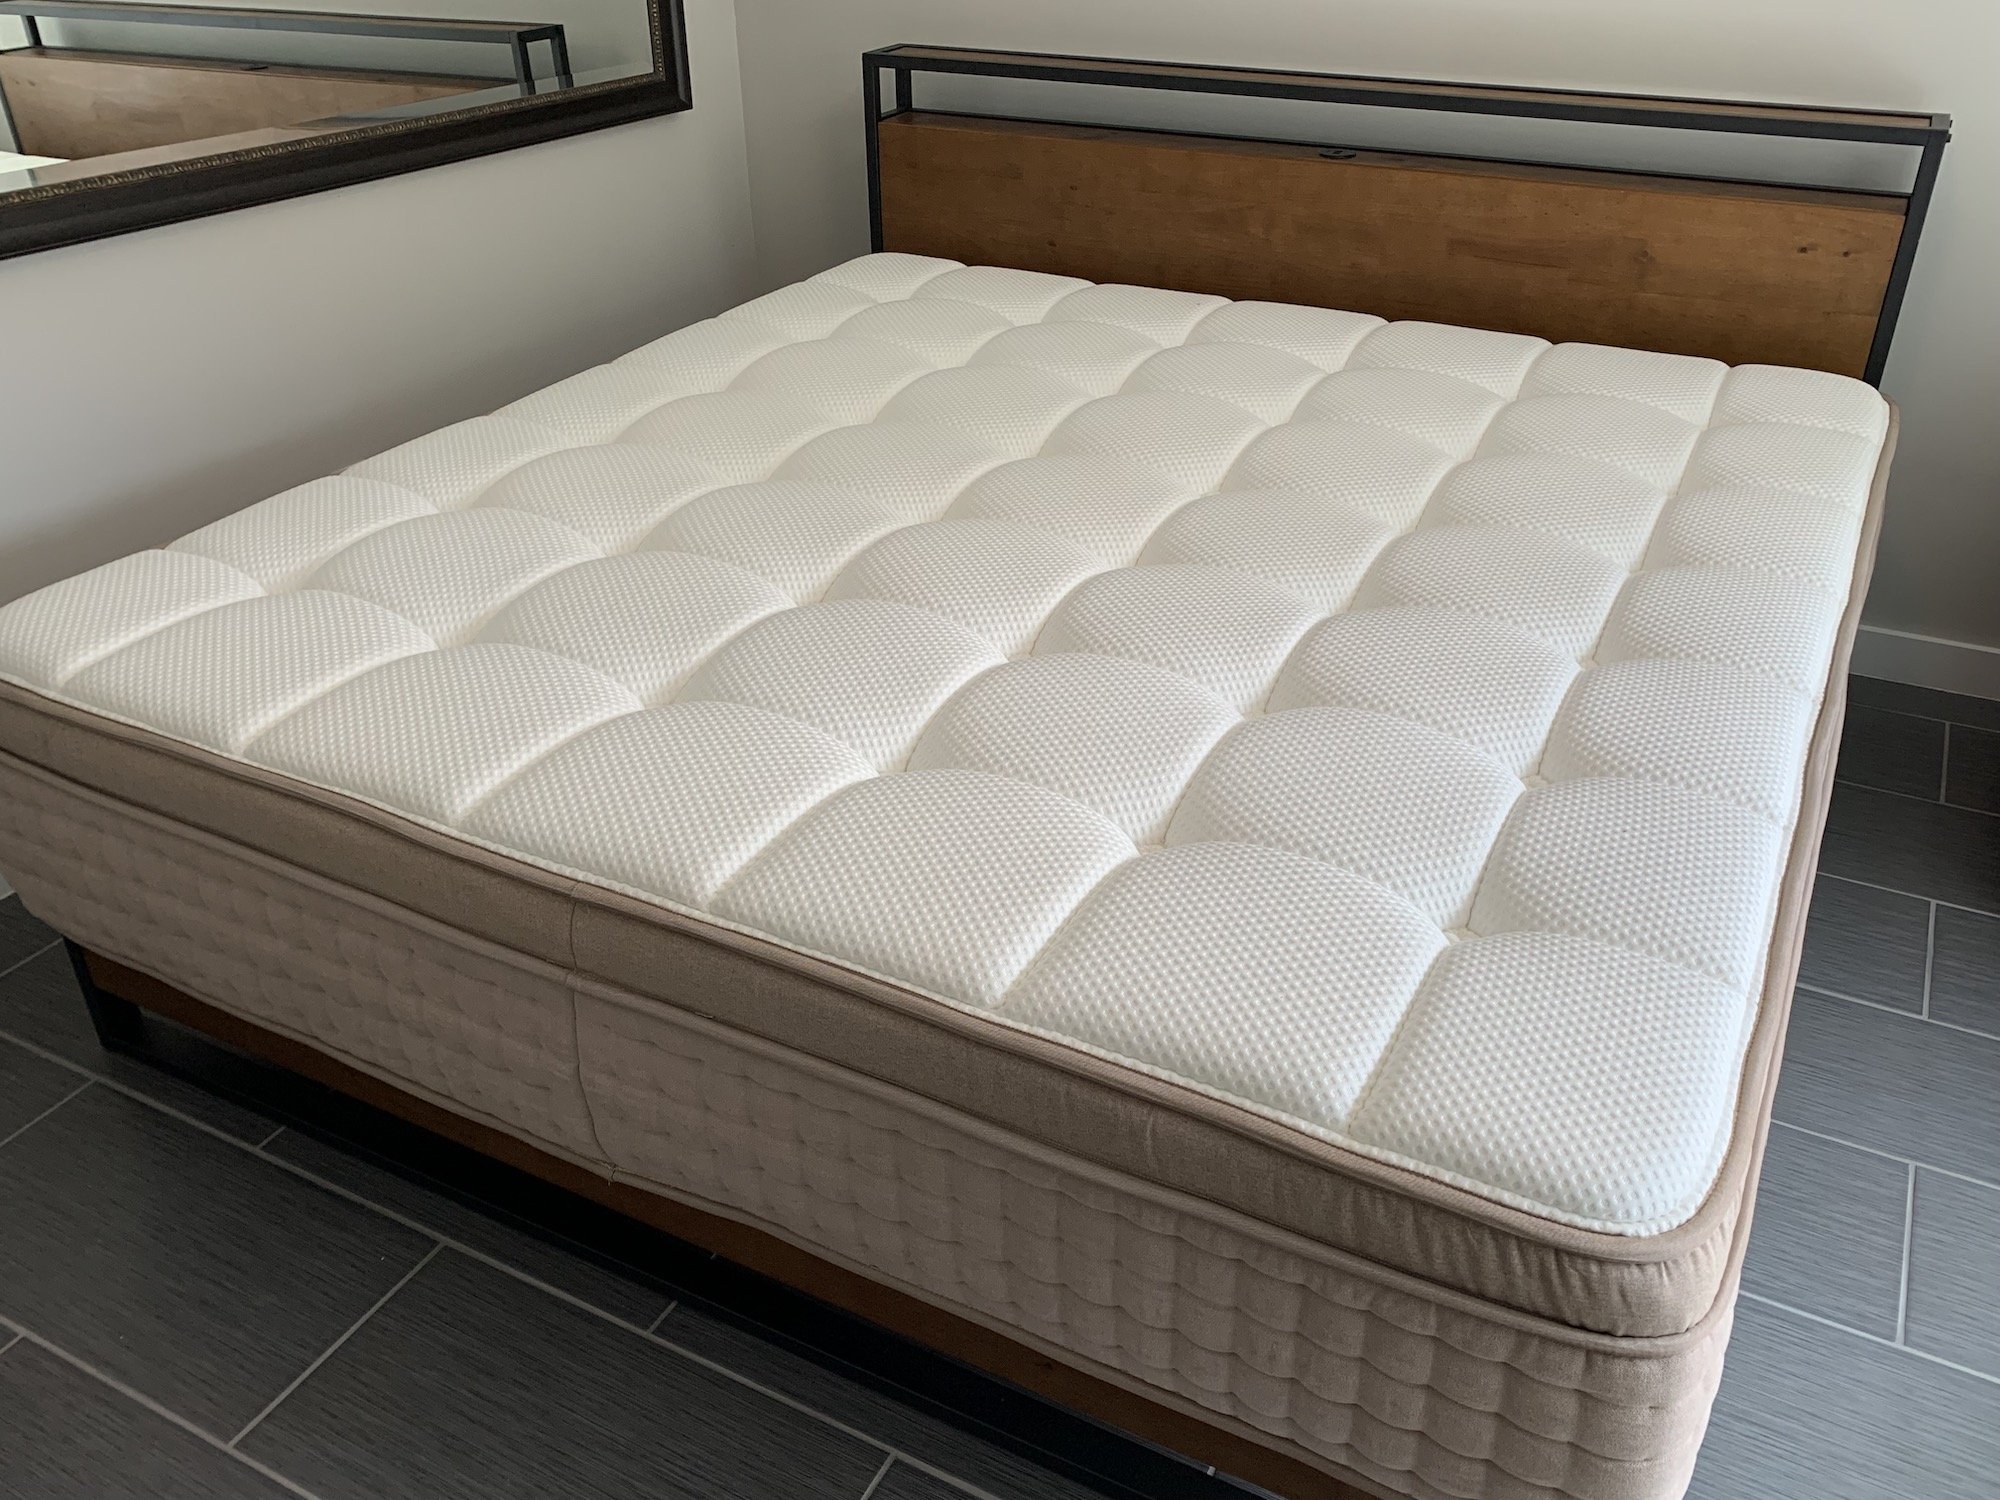 How to Buy a Used Mattress on Facebook